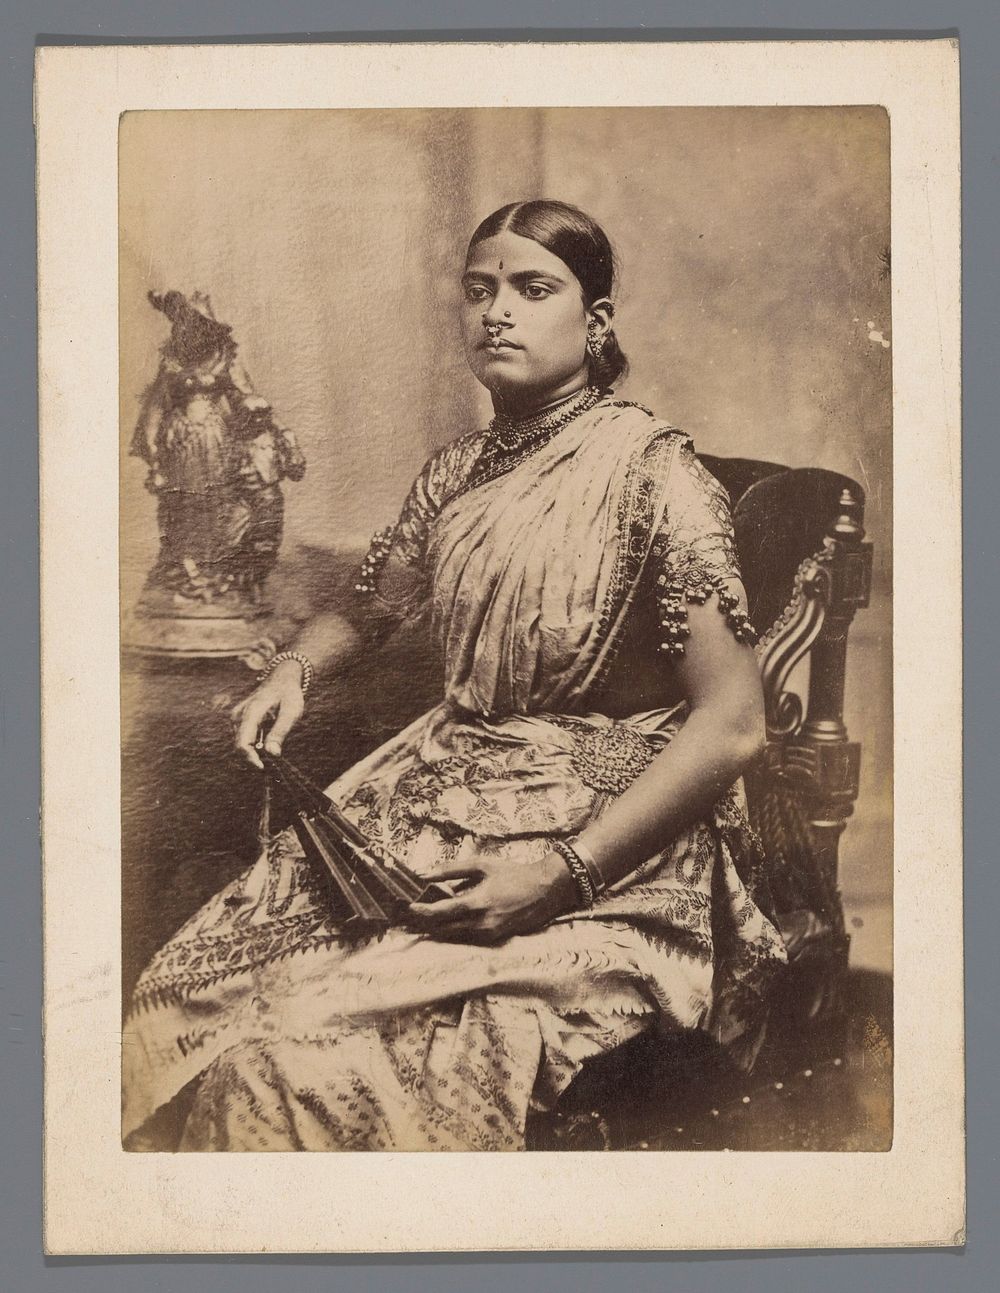 Portrait of an unknown Indian woman (1860 - 1890) by anonymous